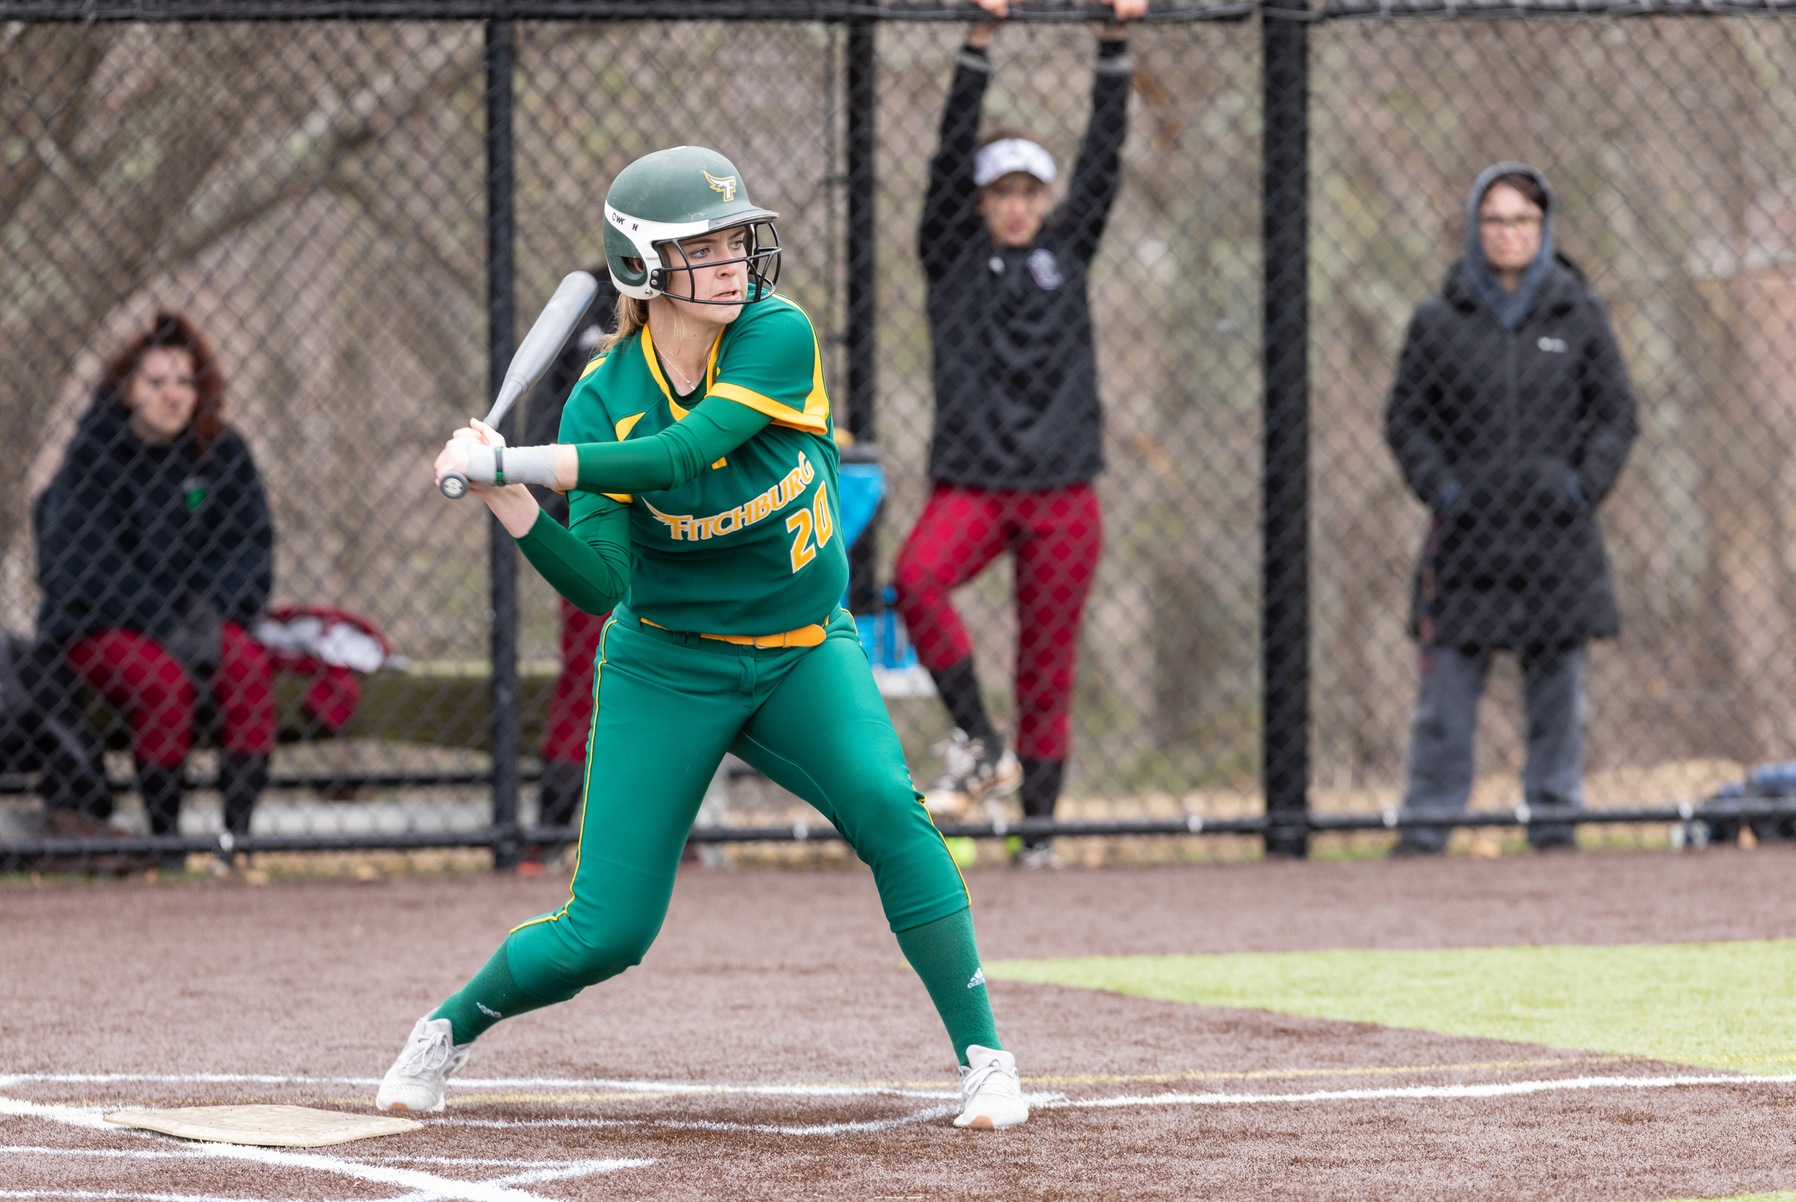 #4 Fitchburg State Advances Over #6 Worcester State